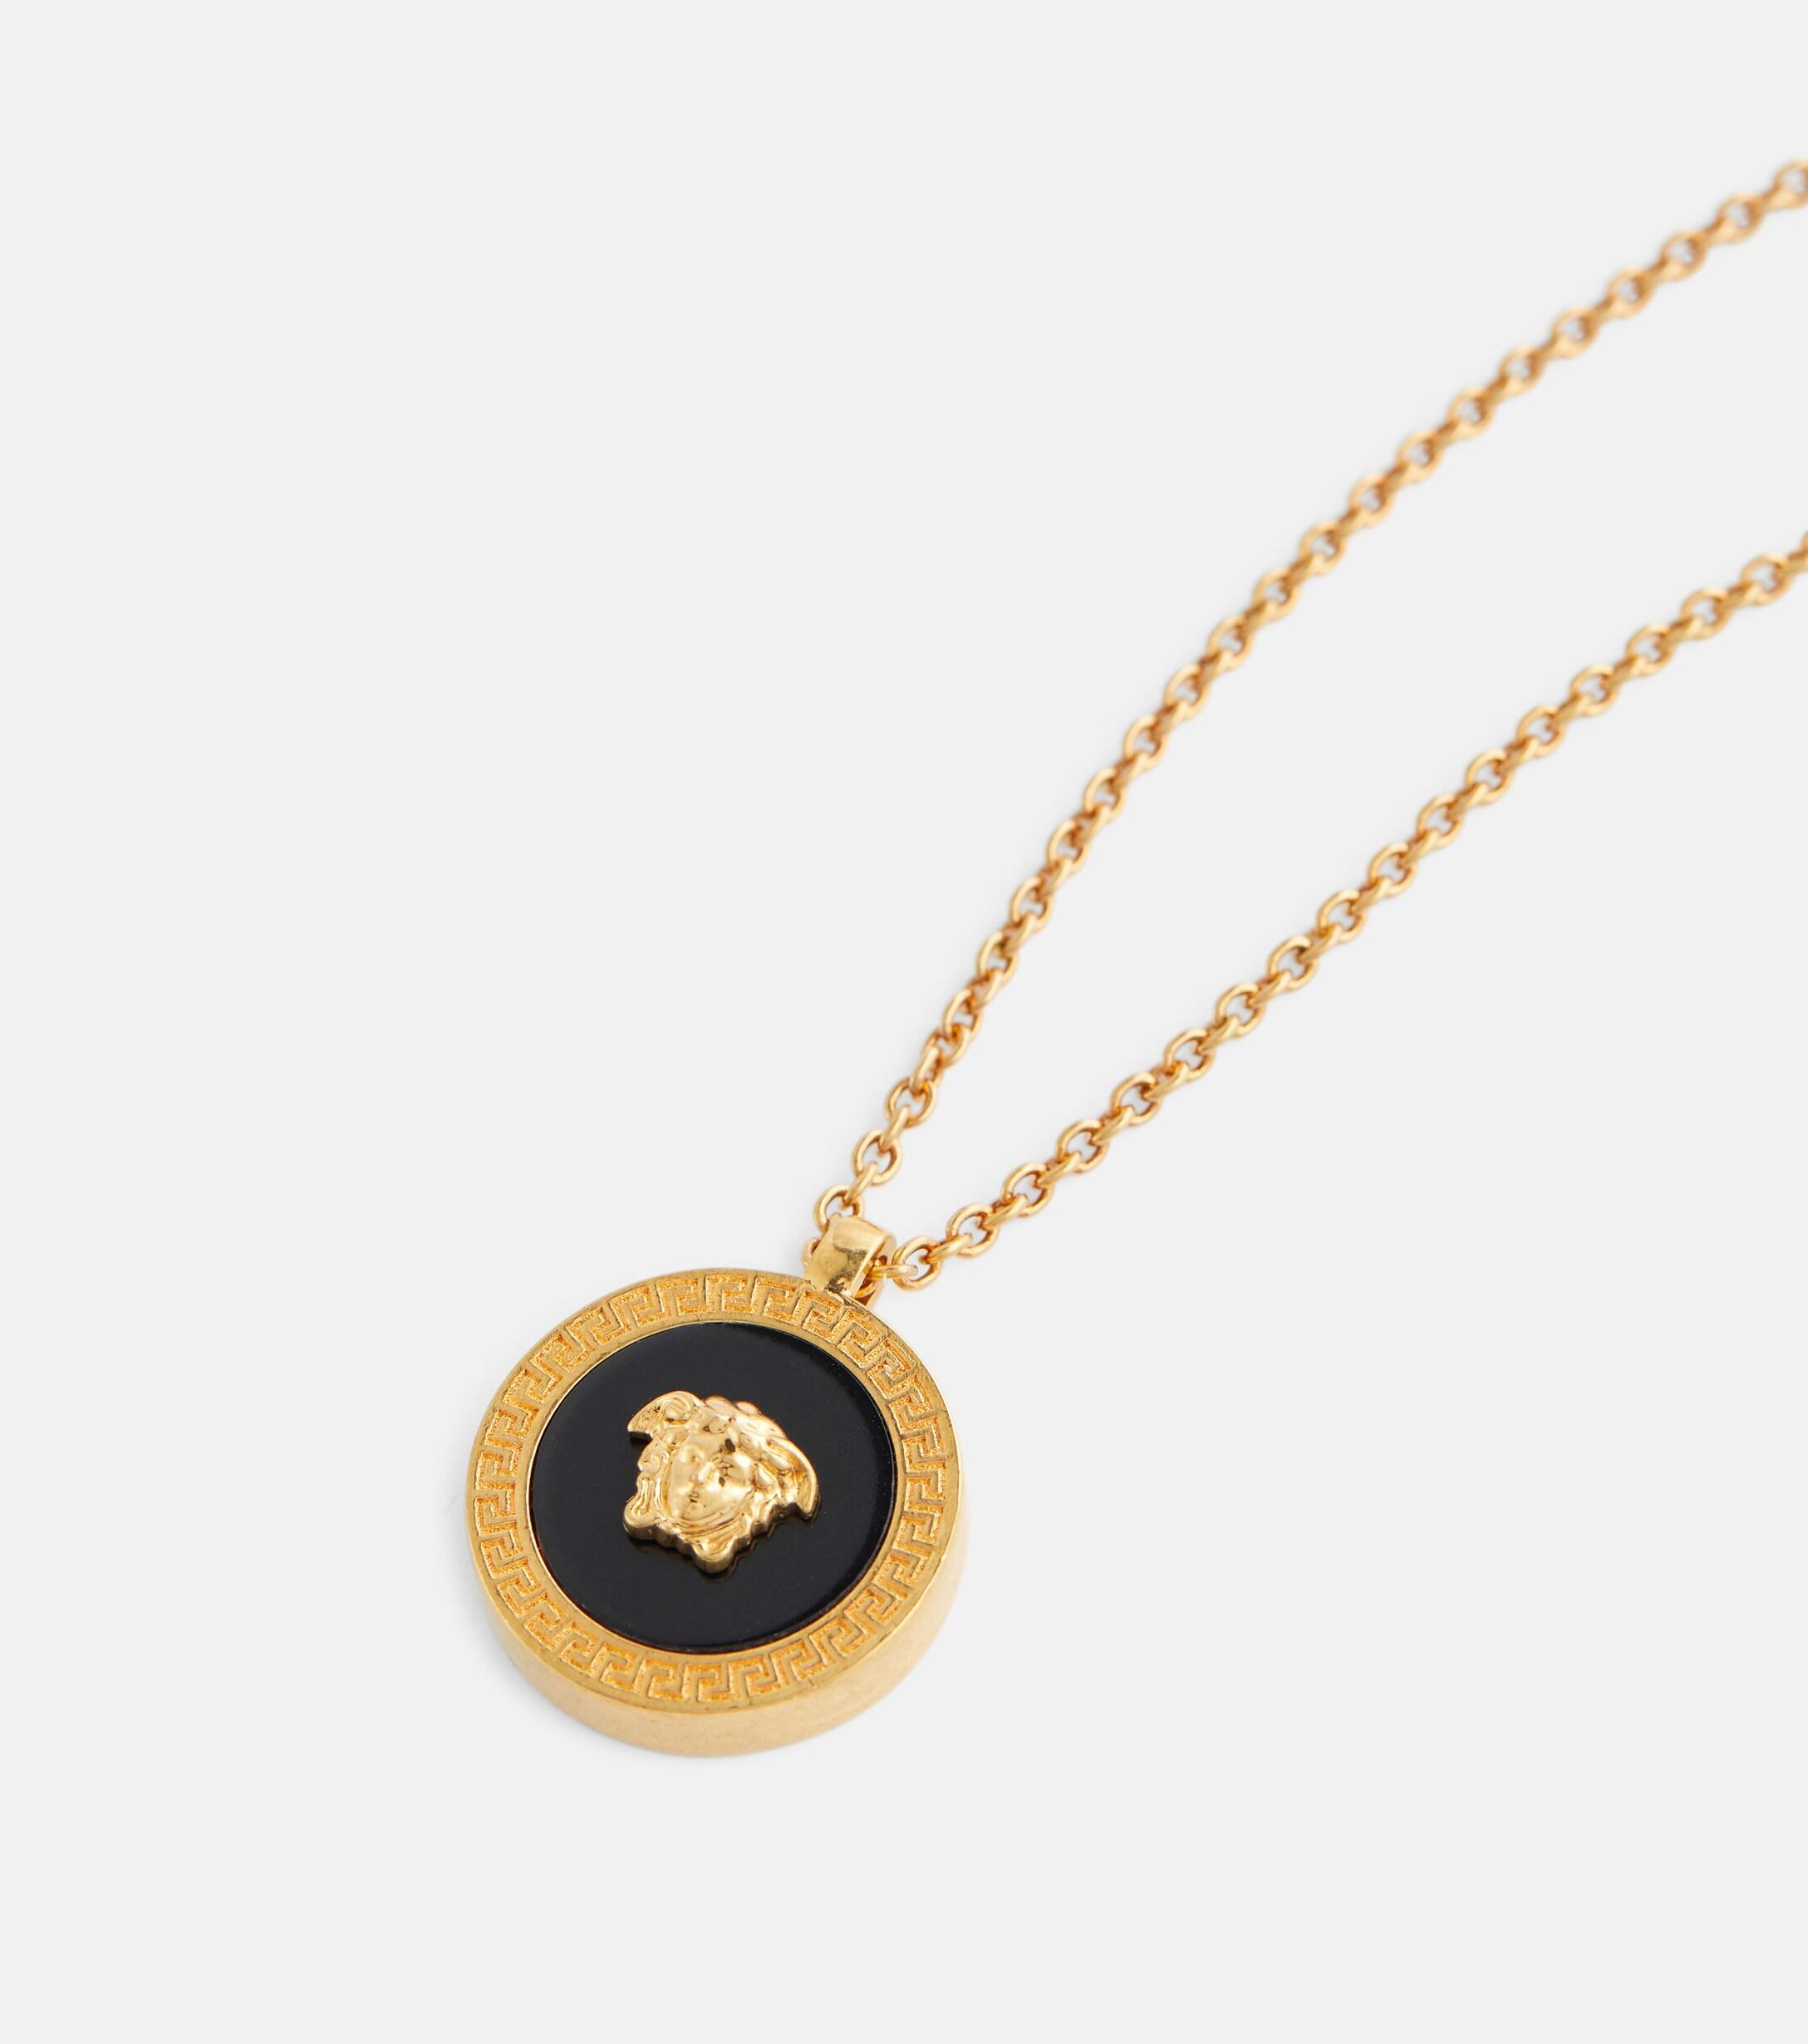 Versace Medusa Necklace in Gold (Metallic) - Save 7% - Lyst